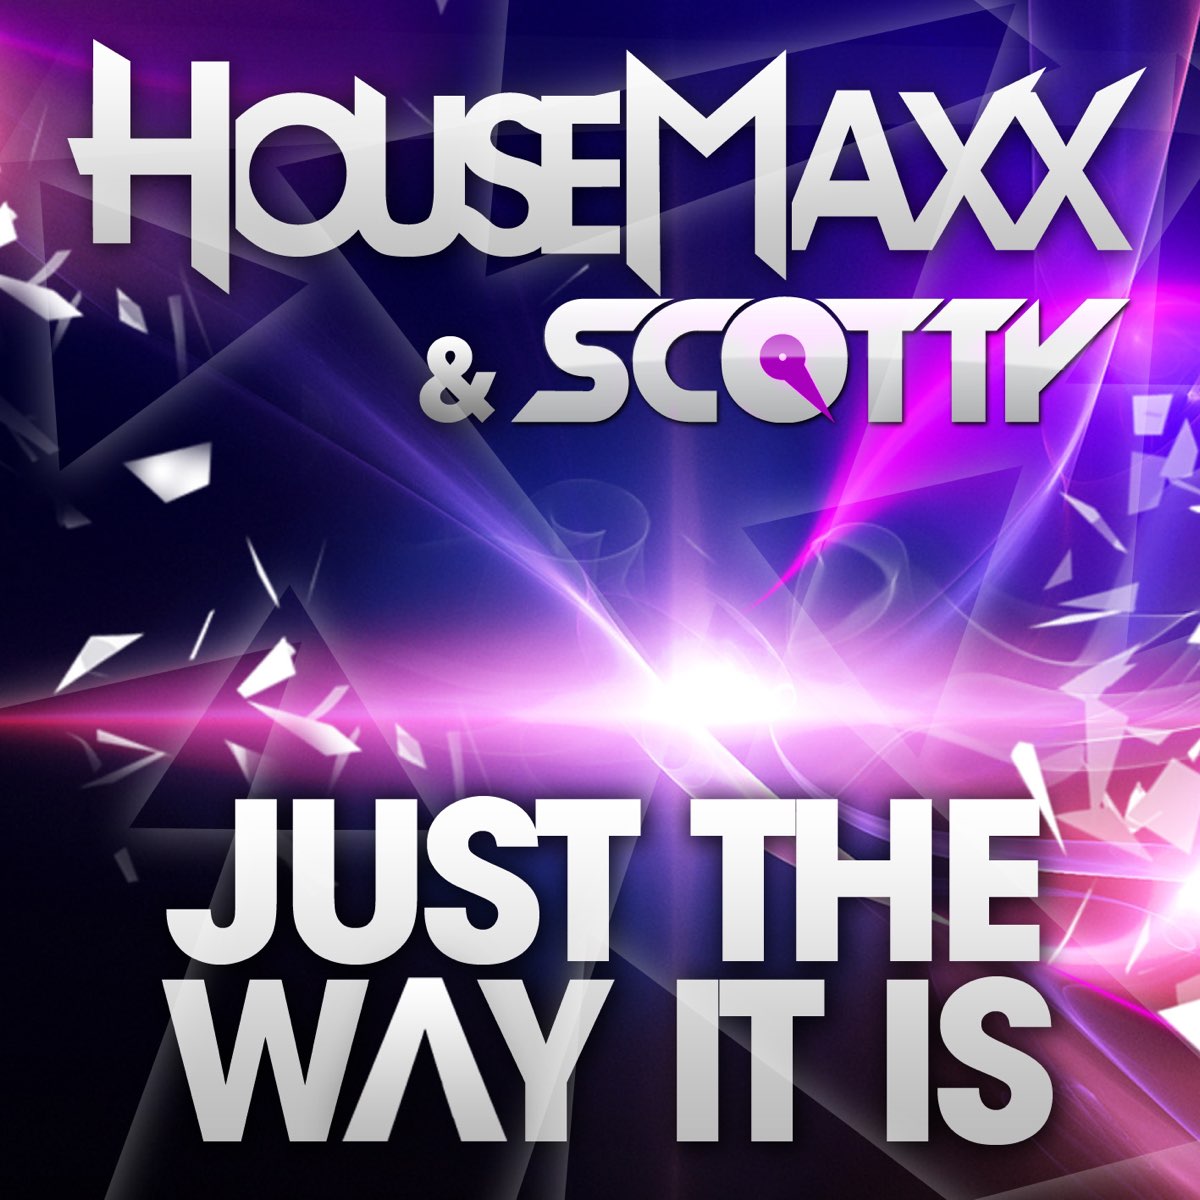 Just the Way It Is - Album by HouseMaxx & Scotty - Apple Music